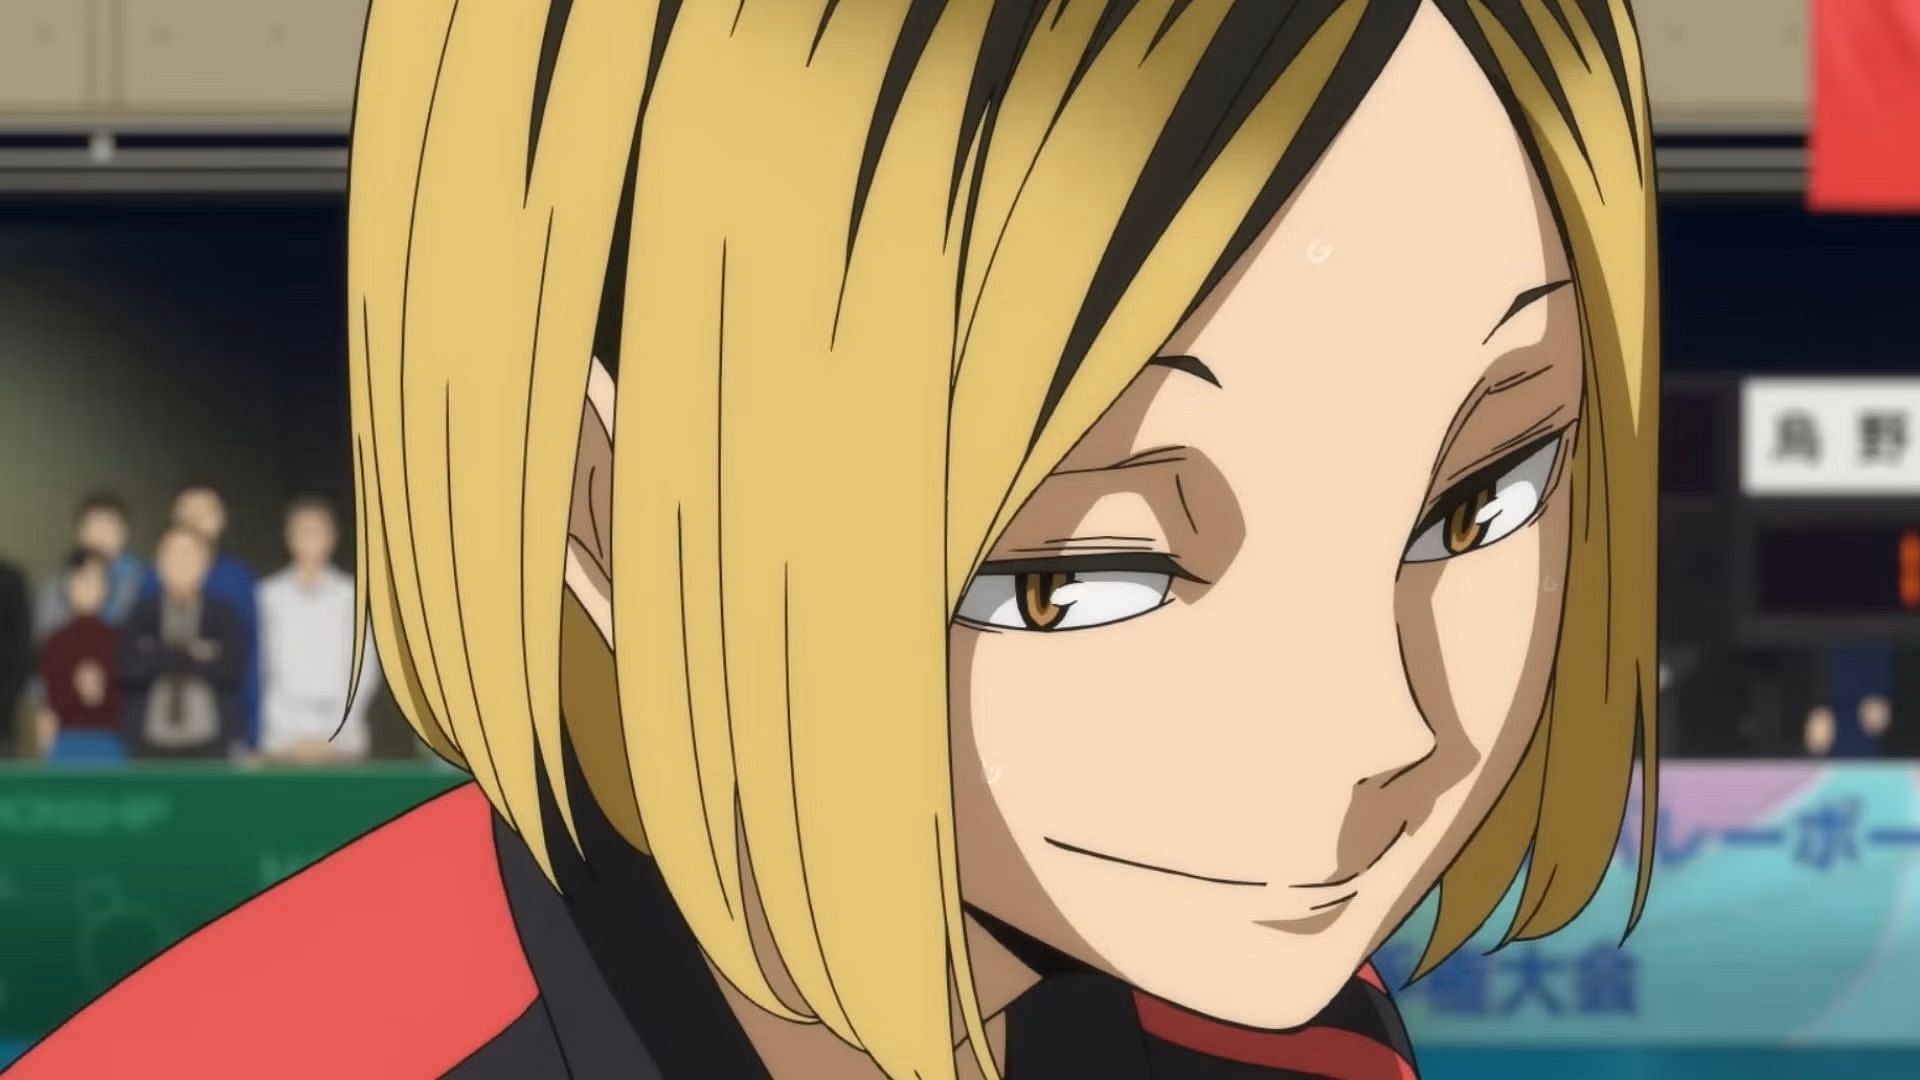 Kenma Kozume, as seen in the movie (Image via Production I.G)